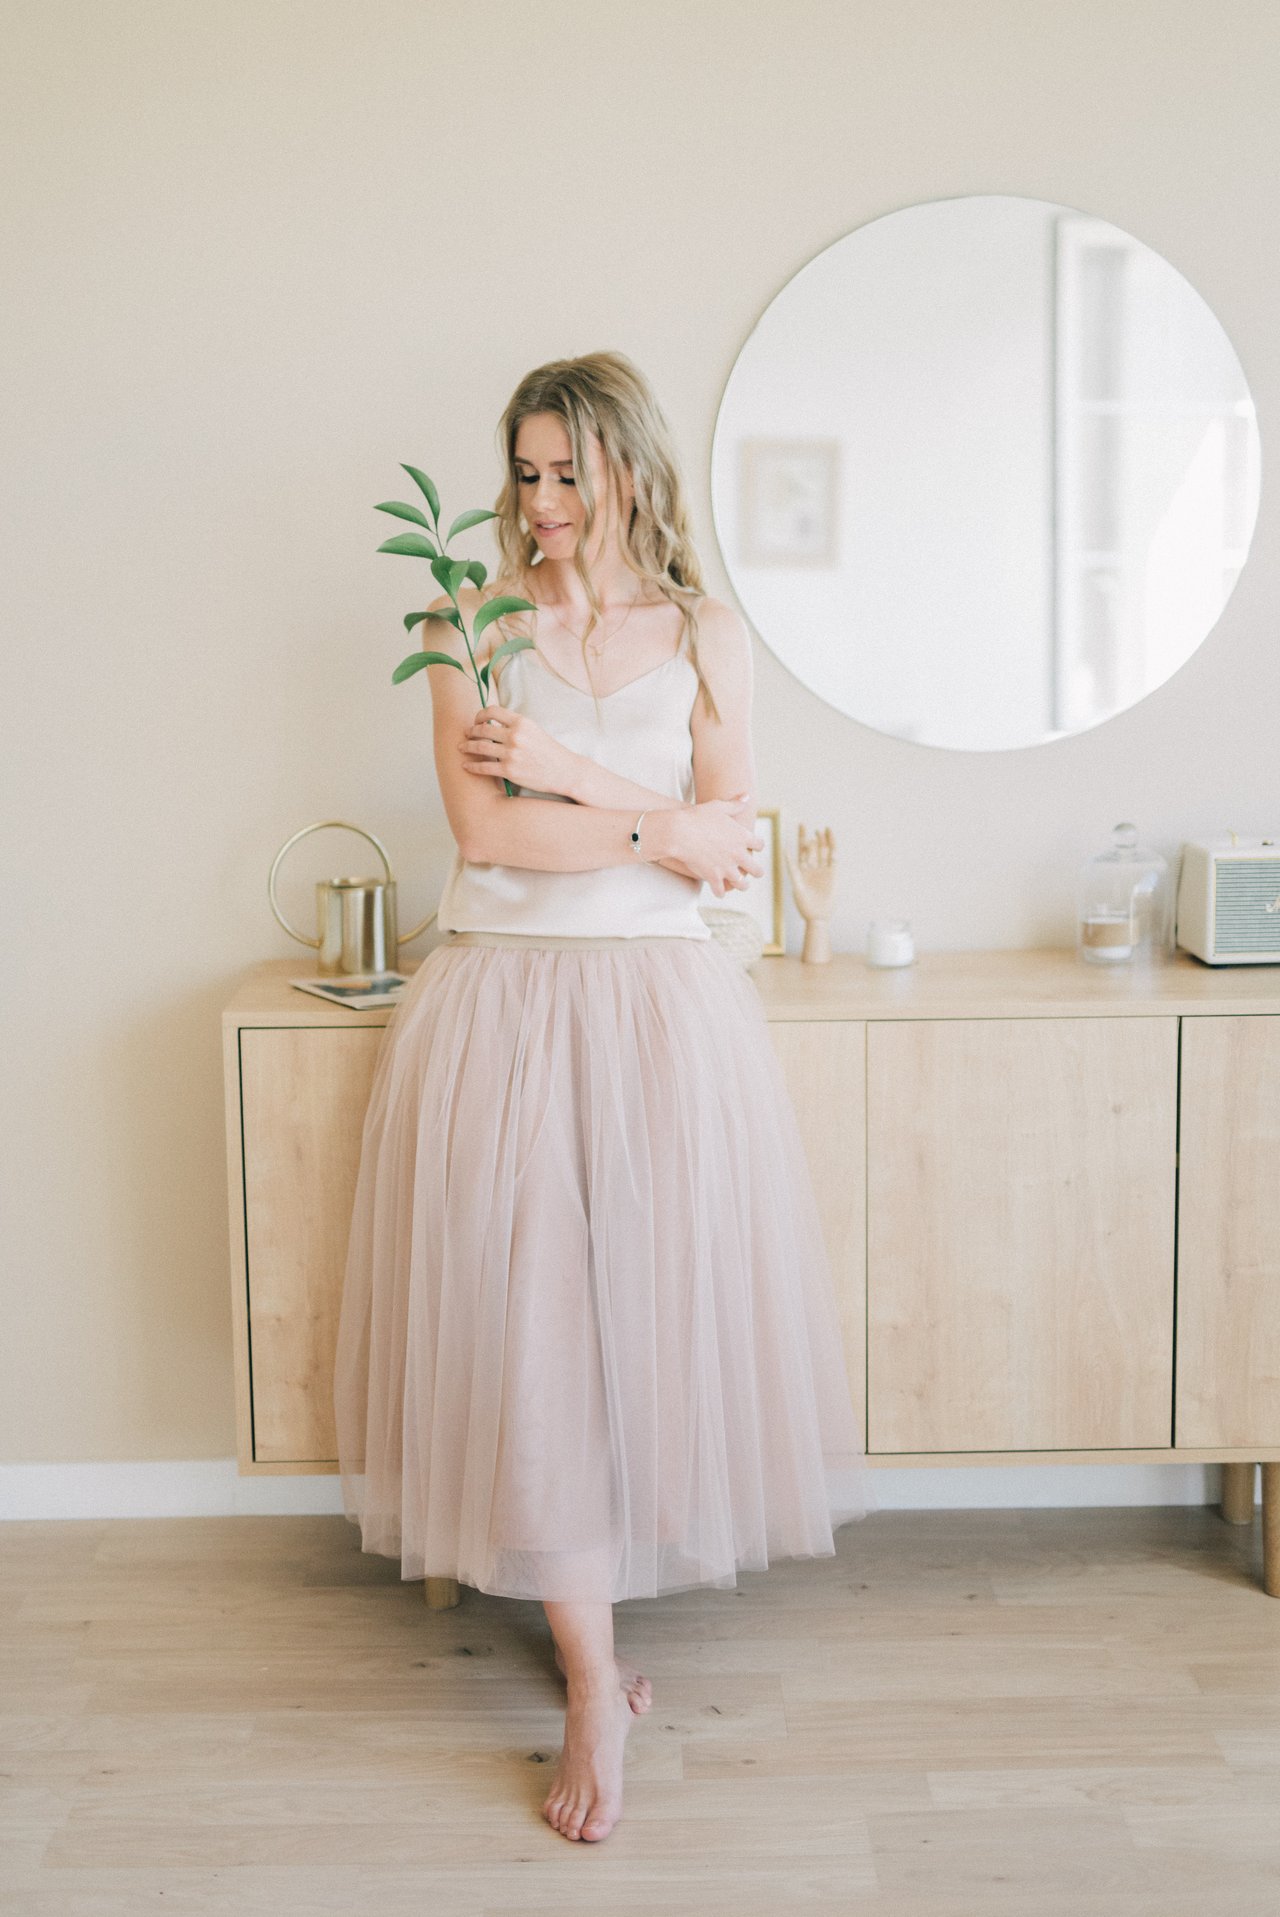 How to wear a tulle skirt without looking fat